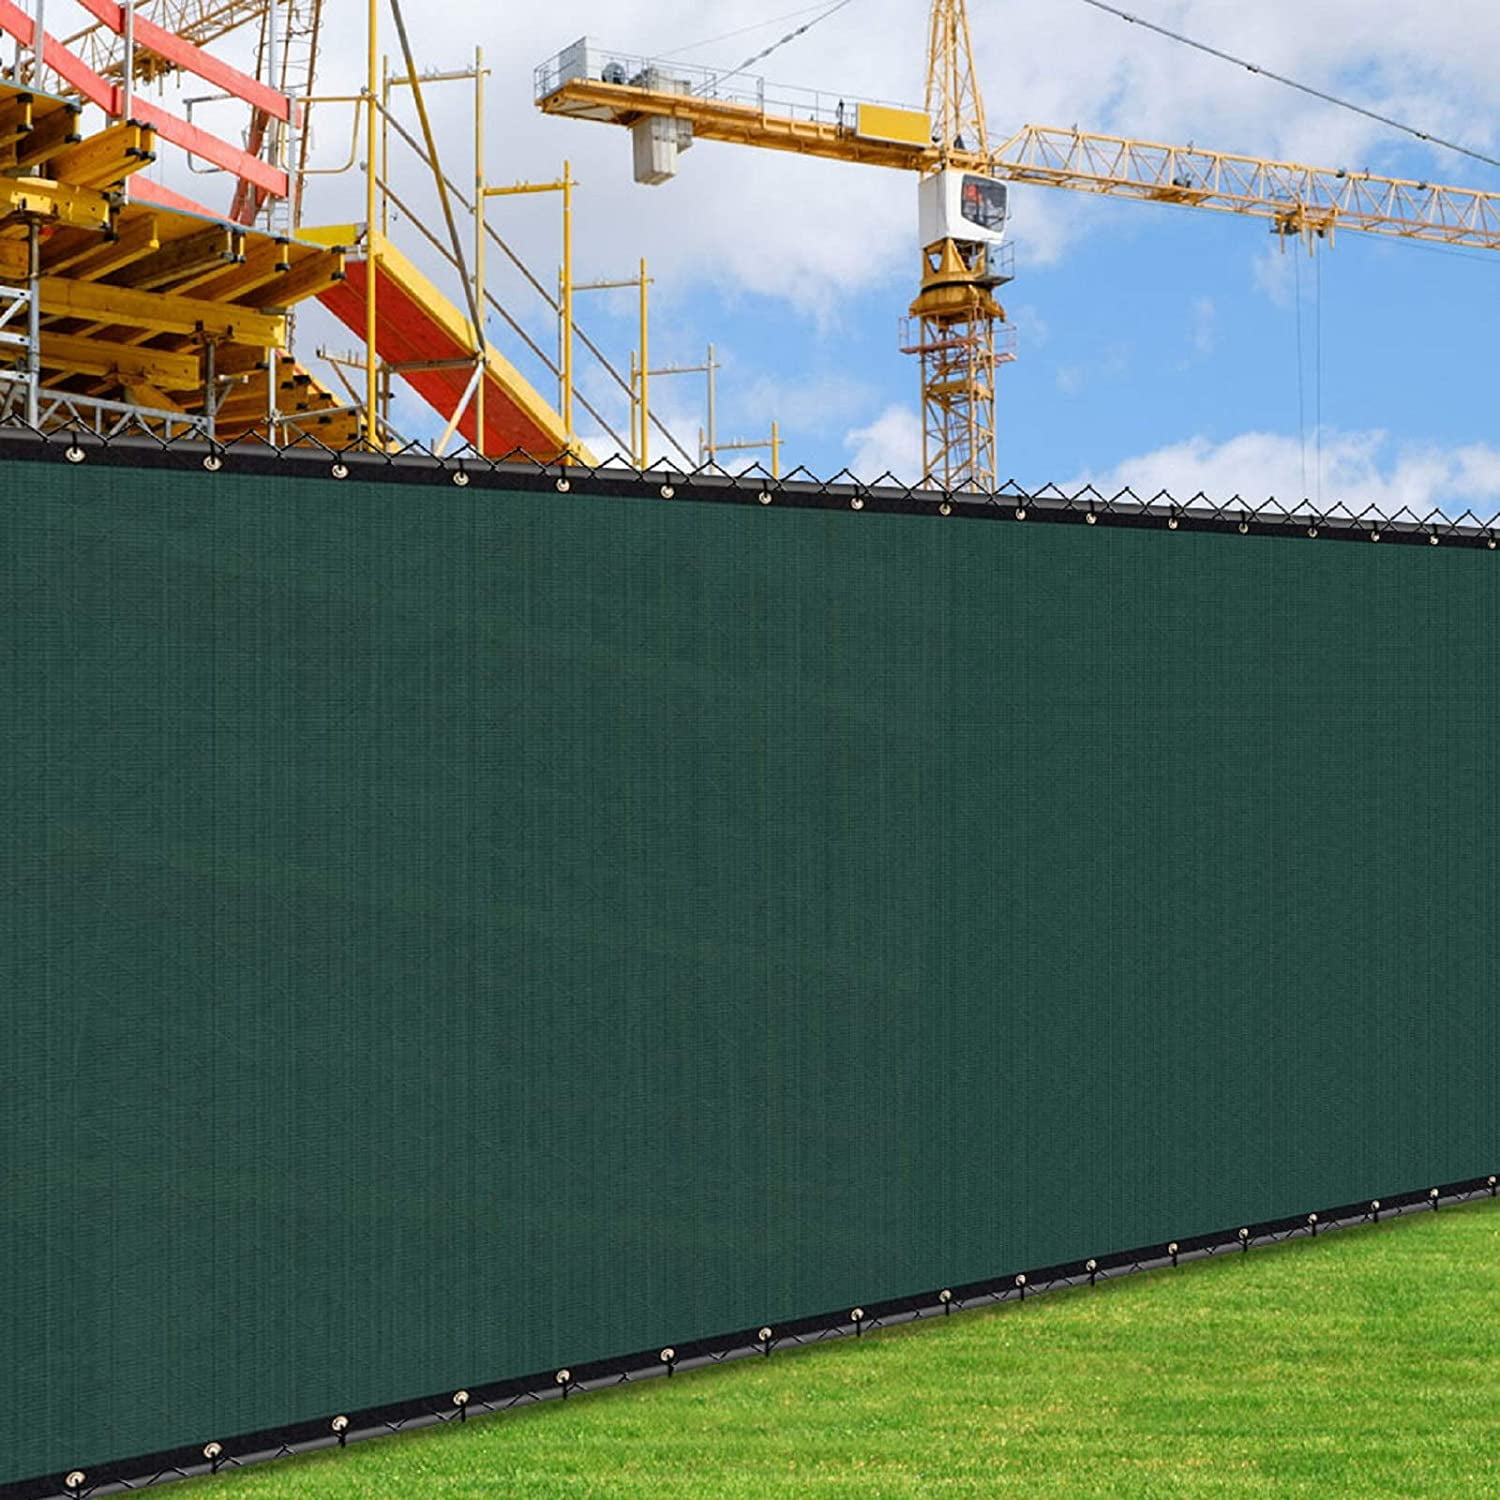 WE Custom Make Size Cable Zip Ties Included Royal Shade 8' x 1' Black Fence Privacy Screen Windscreen Cover Netting Mesh Fabric Cloth 